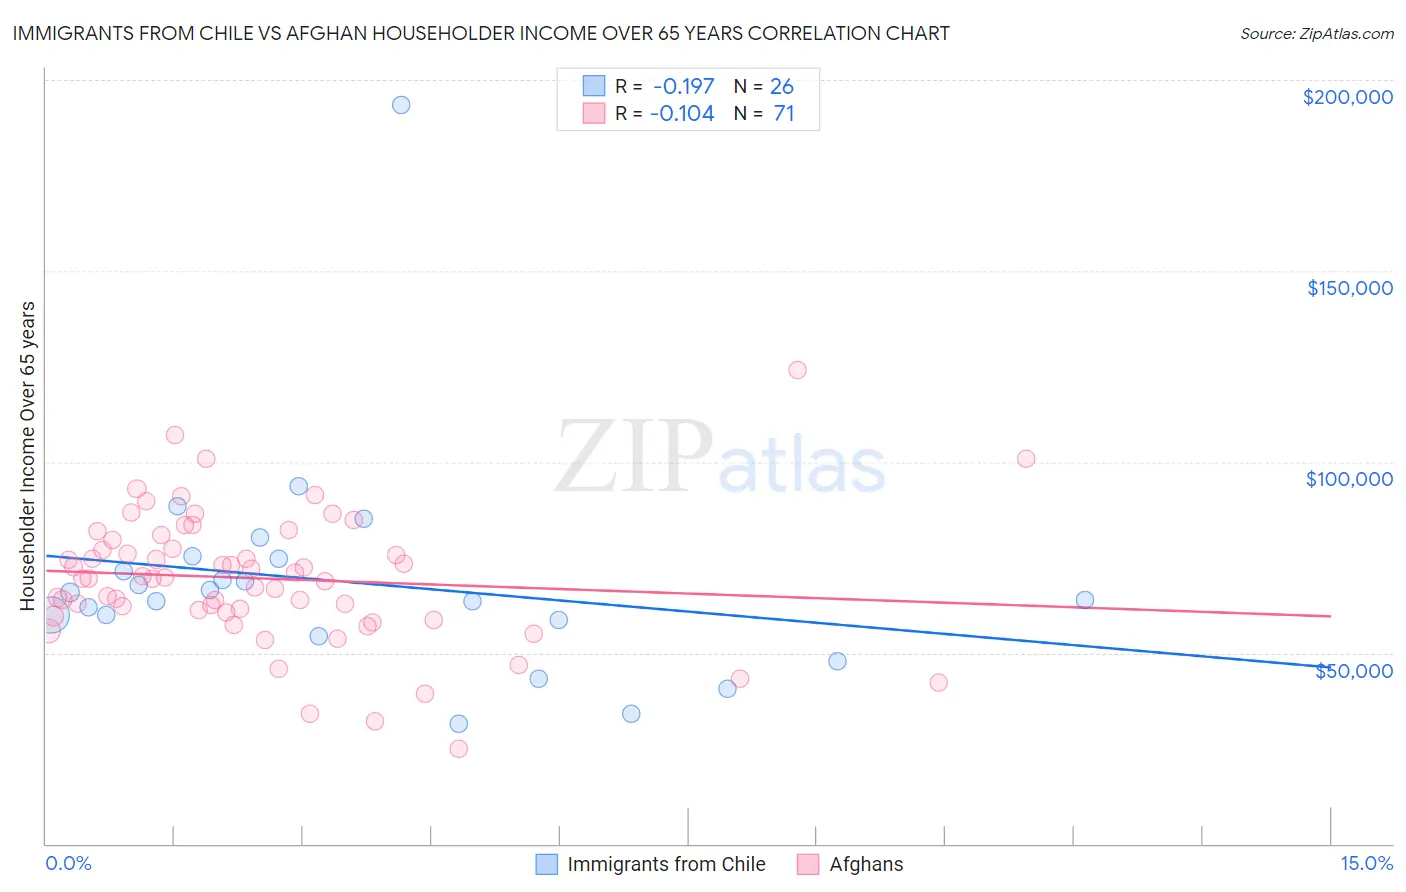 Immigrants from Chile vs Afghan Householder Income Over 65 years